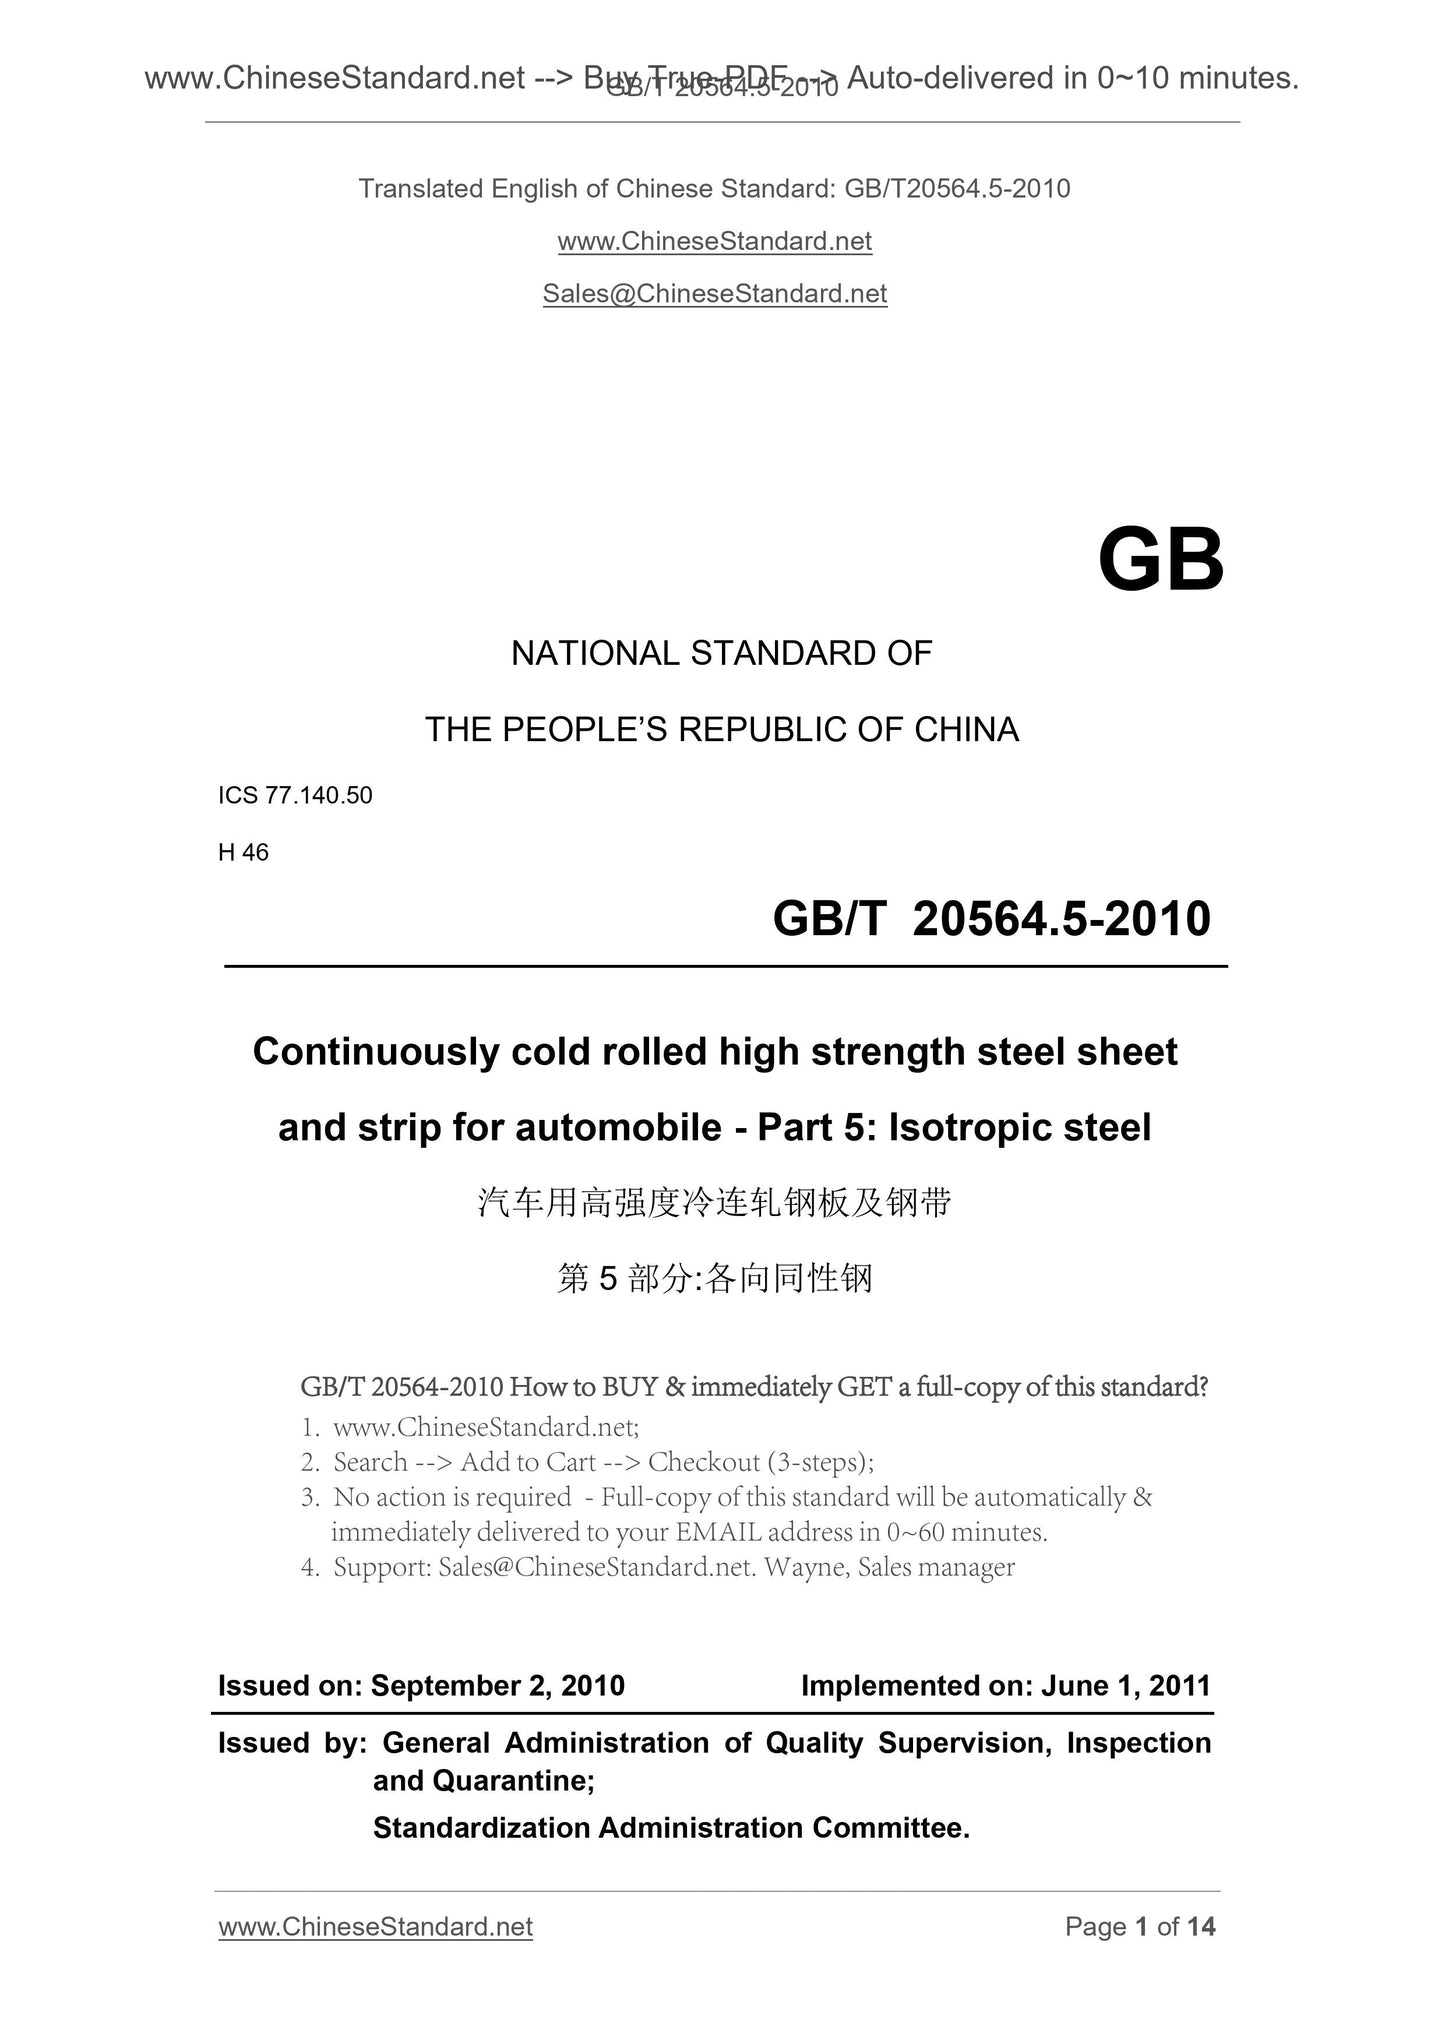 GB/T 20564.5-2010 Page 1